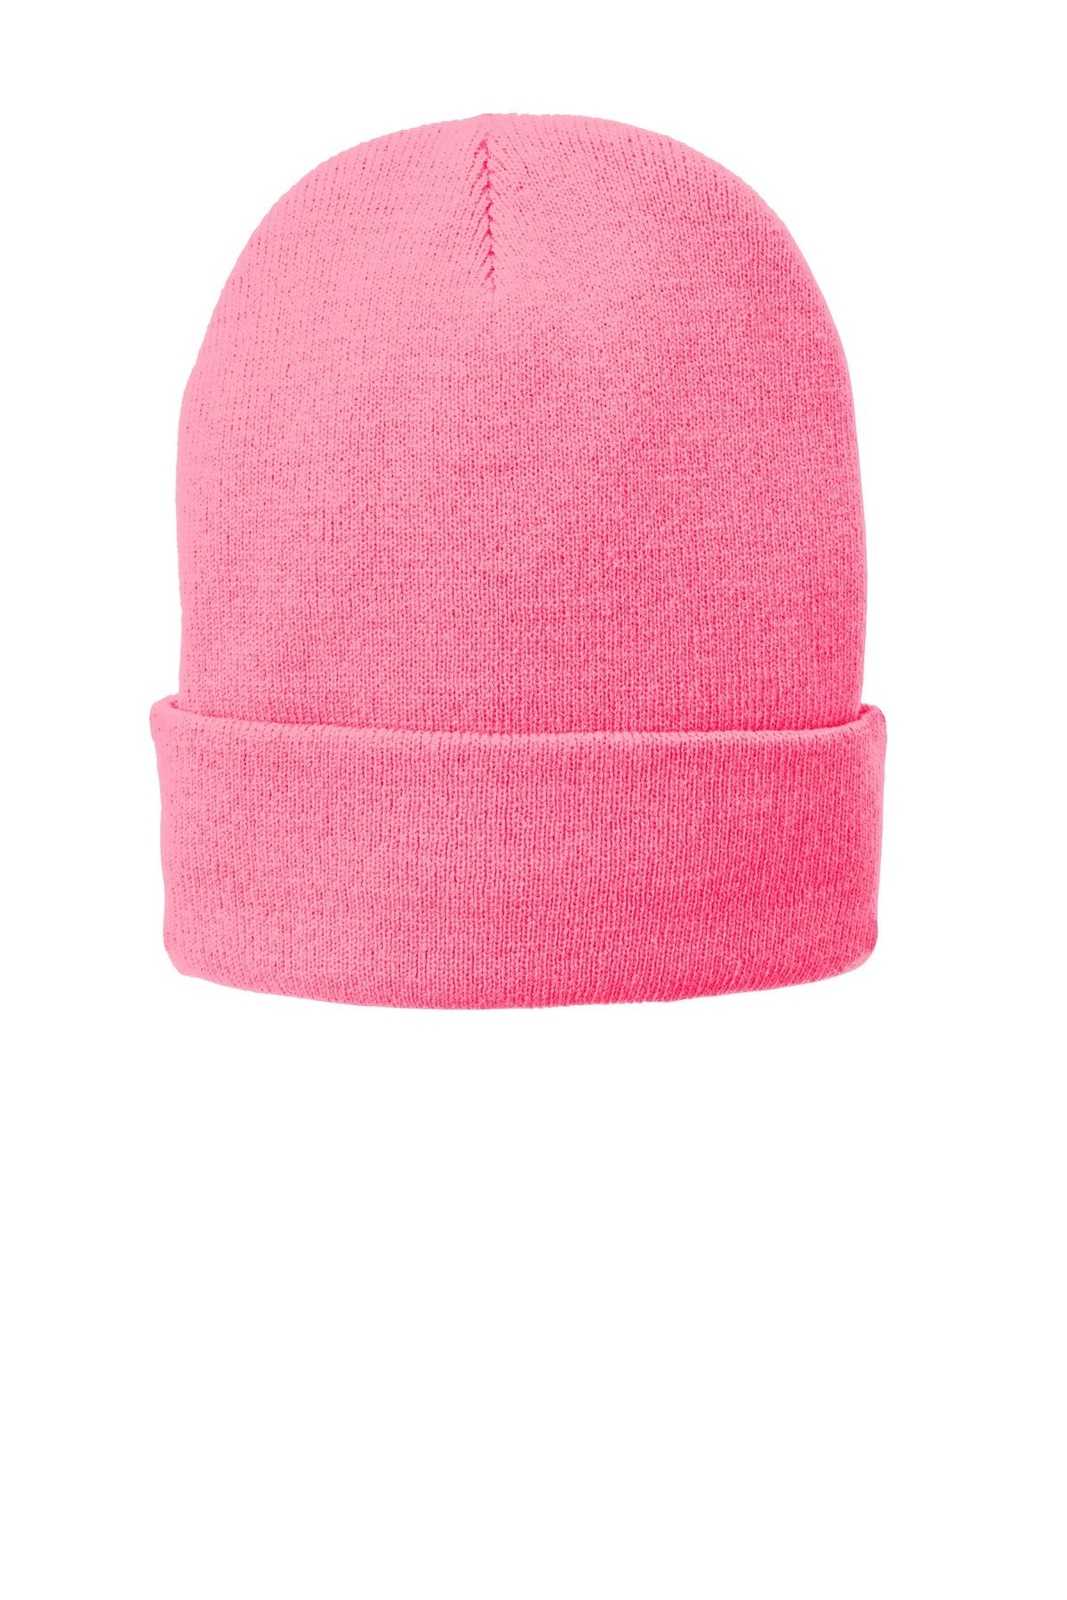 Port & Company CP90L Fleece-Lined Knit Cap with Cuff - Neon Pink Glo - HIT a Double - 1